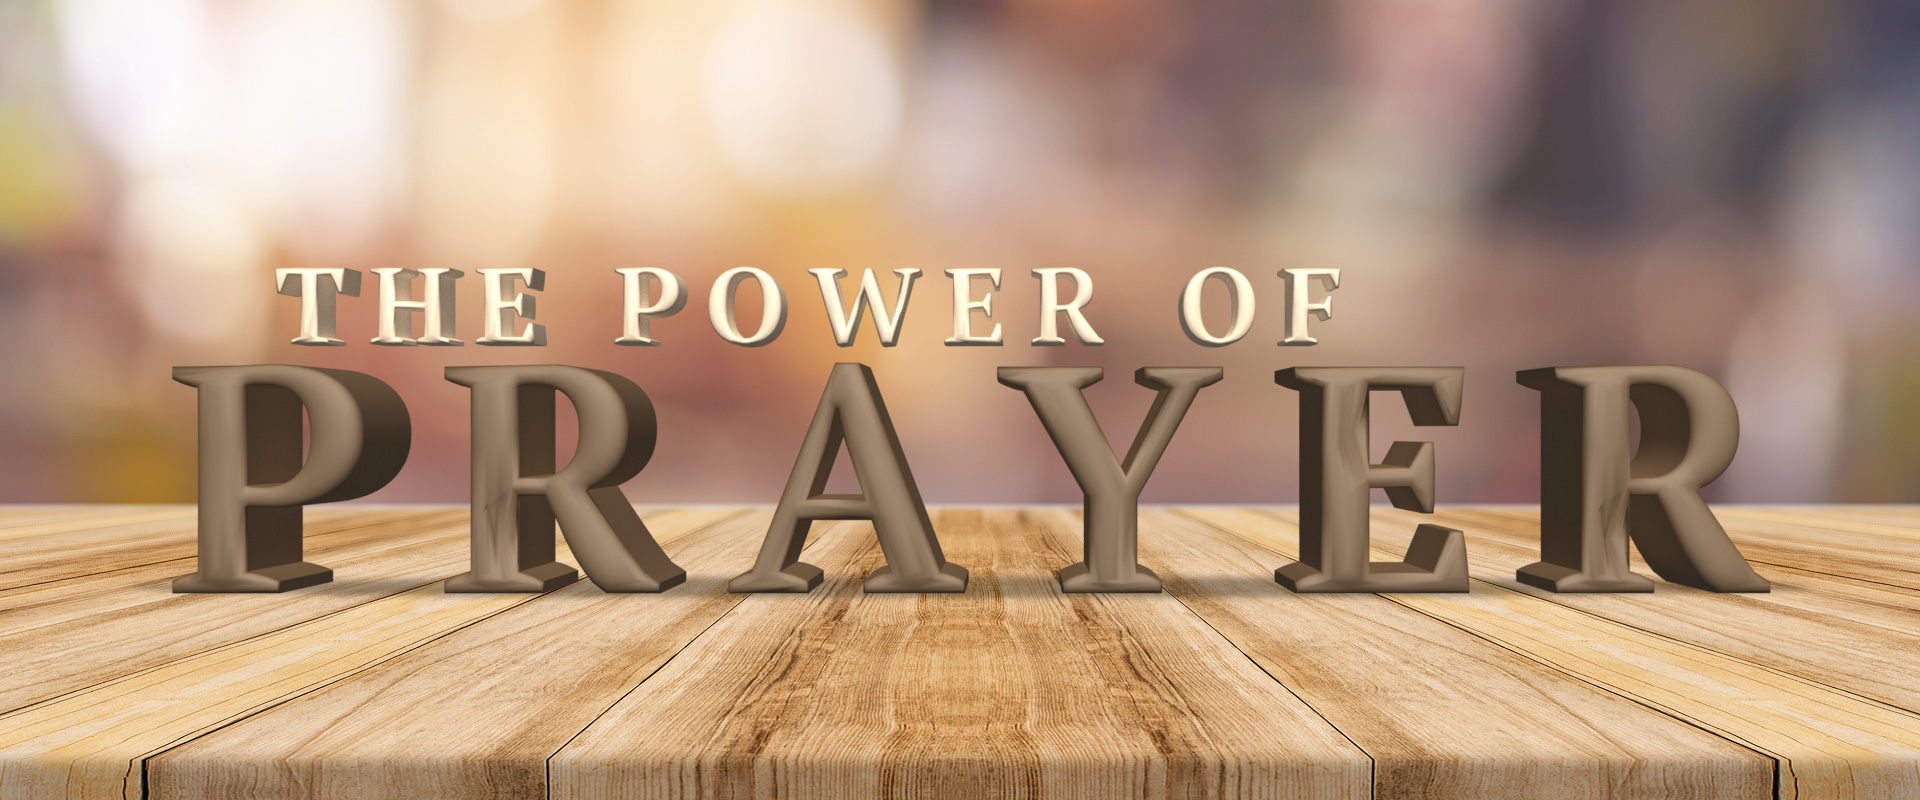 The Power of Prayer: Learning to Communicate with God hero image